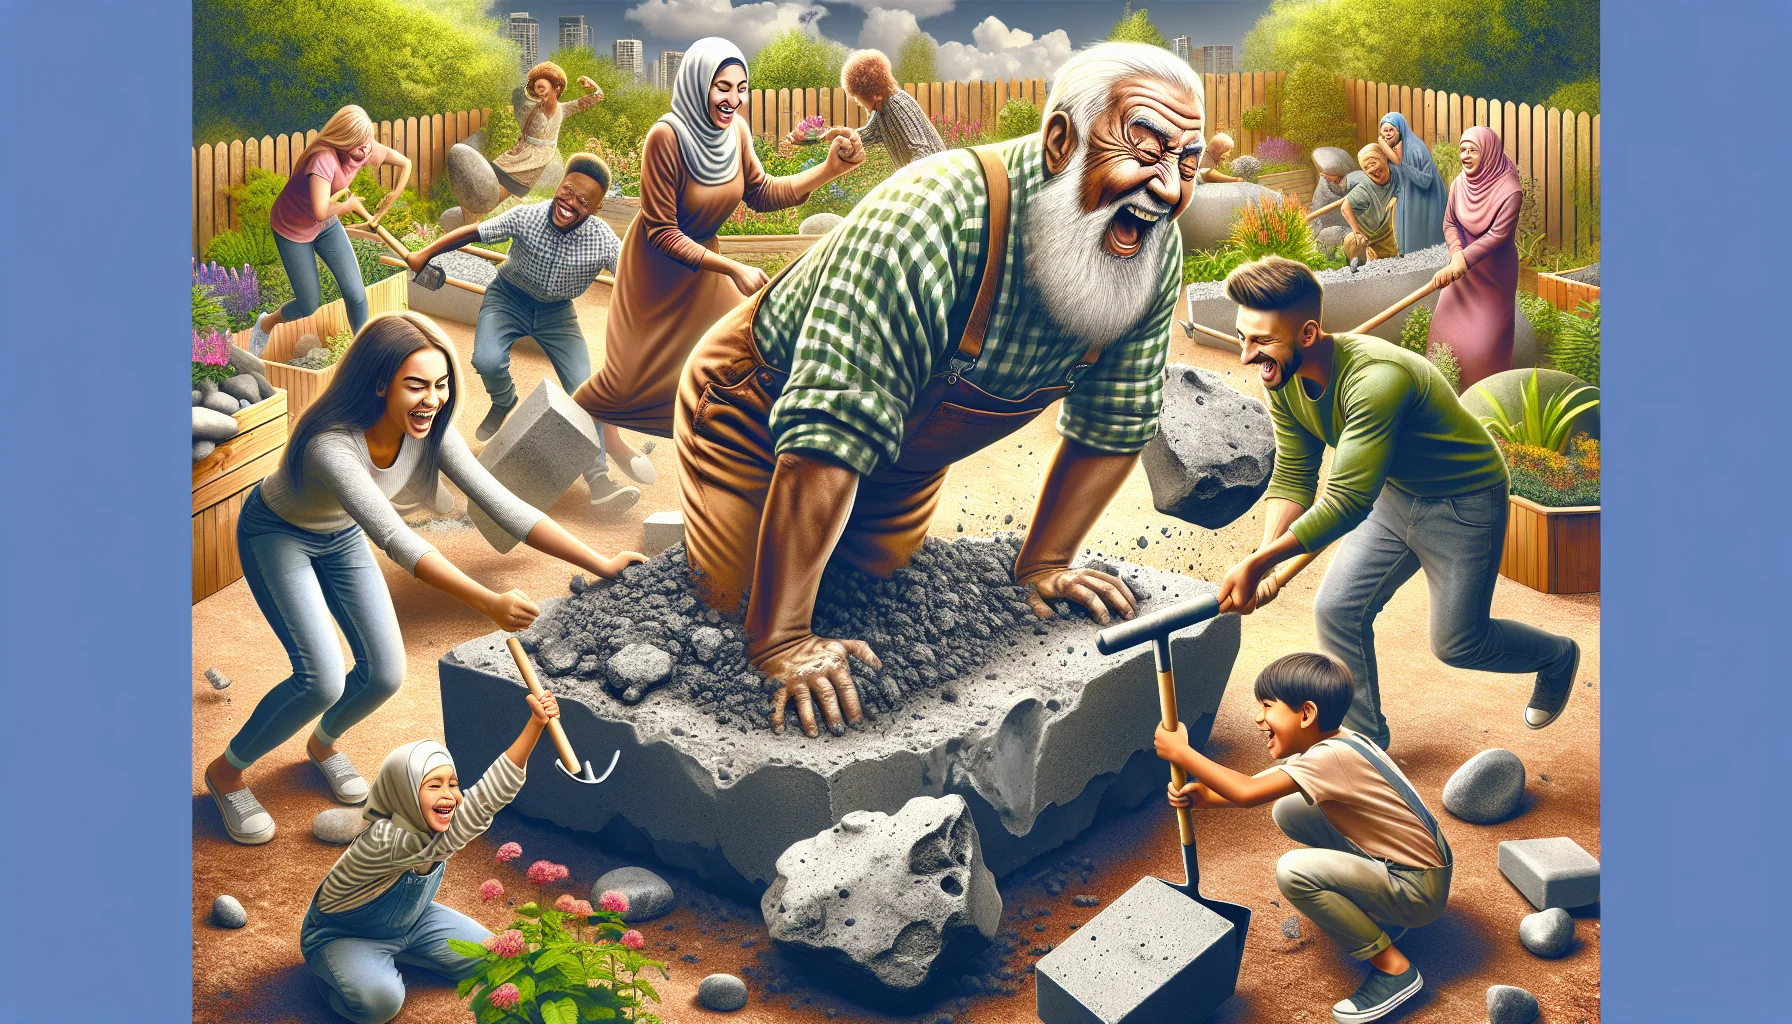 Depict a whimsical and energetic scene in a garden where concrete is being recycled innovatively. Show a variety of people of different descents such as Black, Hispanic, and Middle-Eastern, both male and female, participating in this activity, laughing, and clearly enjoying themselves. They could be using chunks of concrete as planters, decorative rocks or pathway stones in the garden. Add a dash of humor by featuring a sprightly old man attempting to balance himself atop a giant piece of recycled concrete, while children around him joyfully help plant flowers in it.